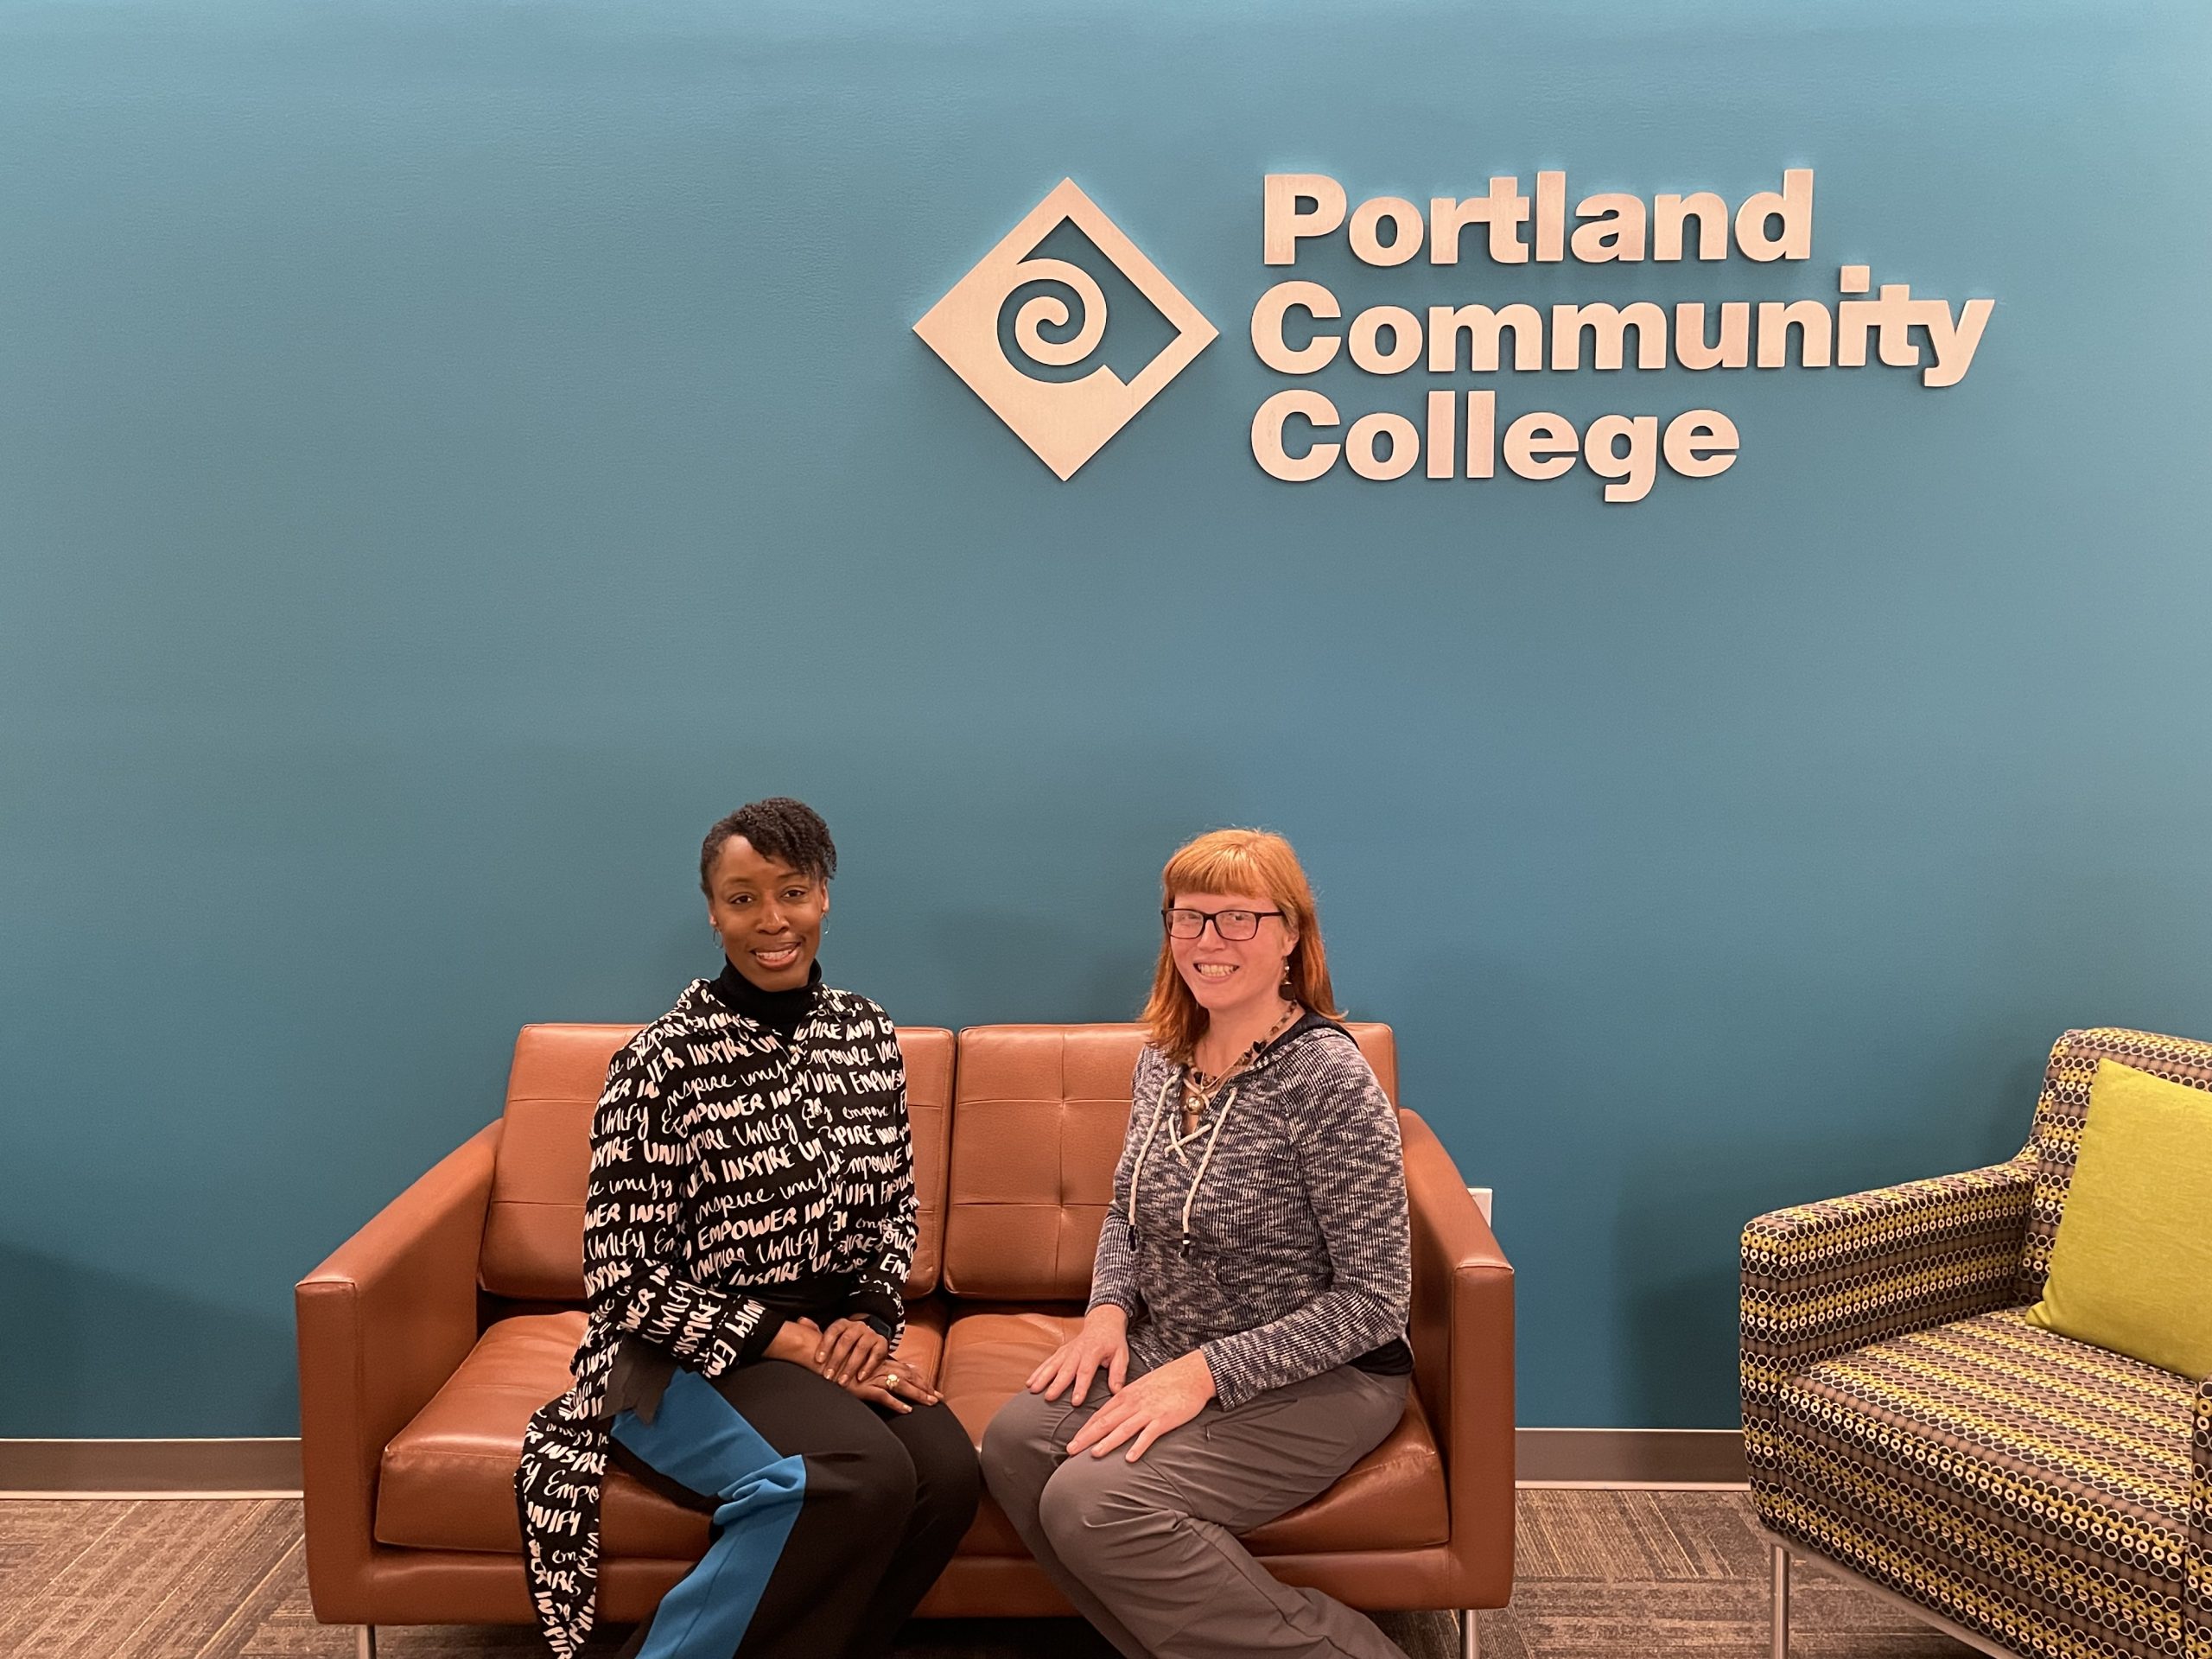 Dr. Adrien Bennings and Carrie Cantrell sitting on a couch and smiling. Behind them is a wall with the PCC logo.